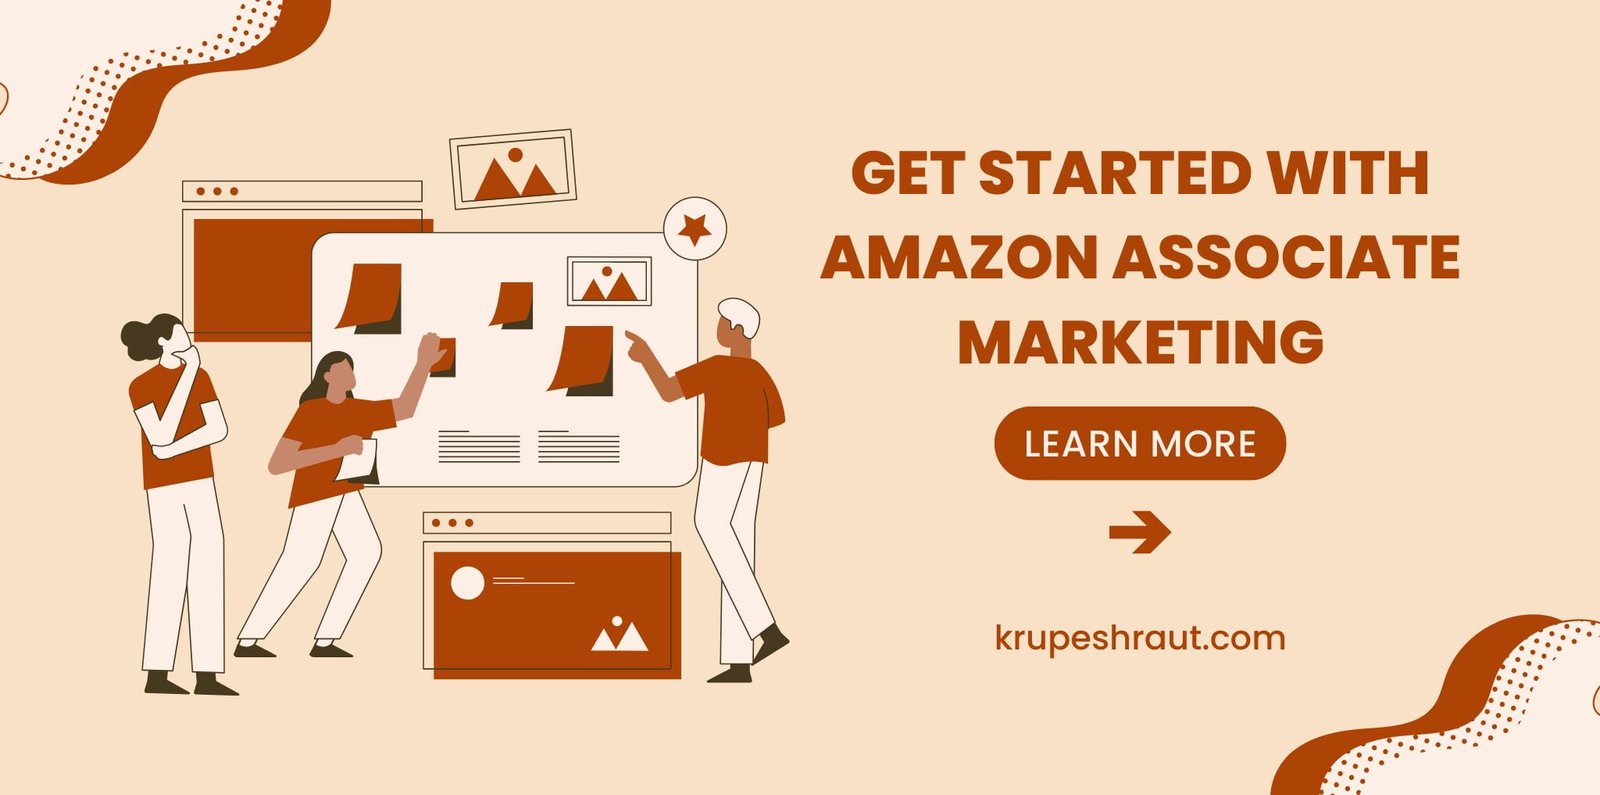 How to get started with Amazon Associate marketing